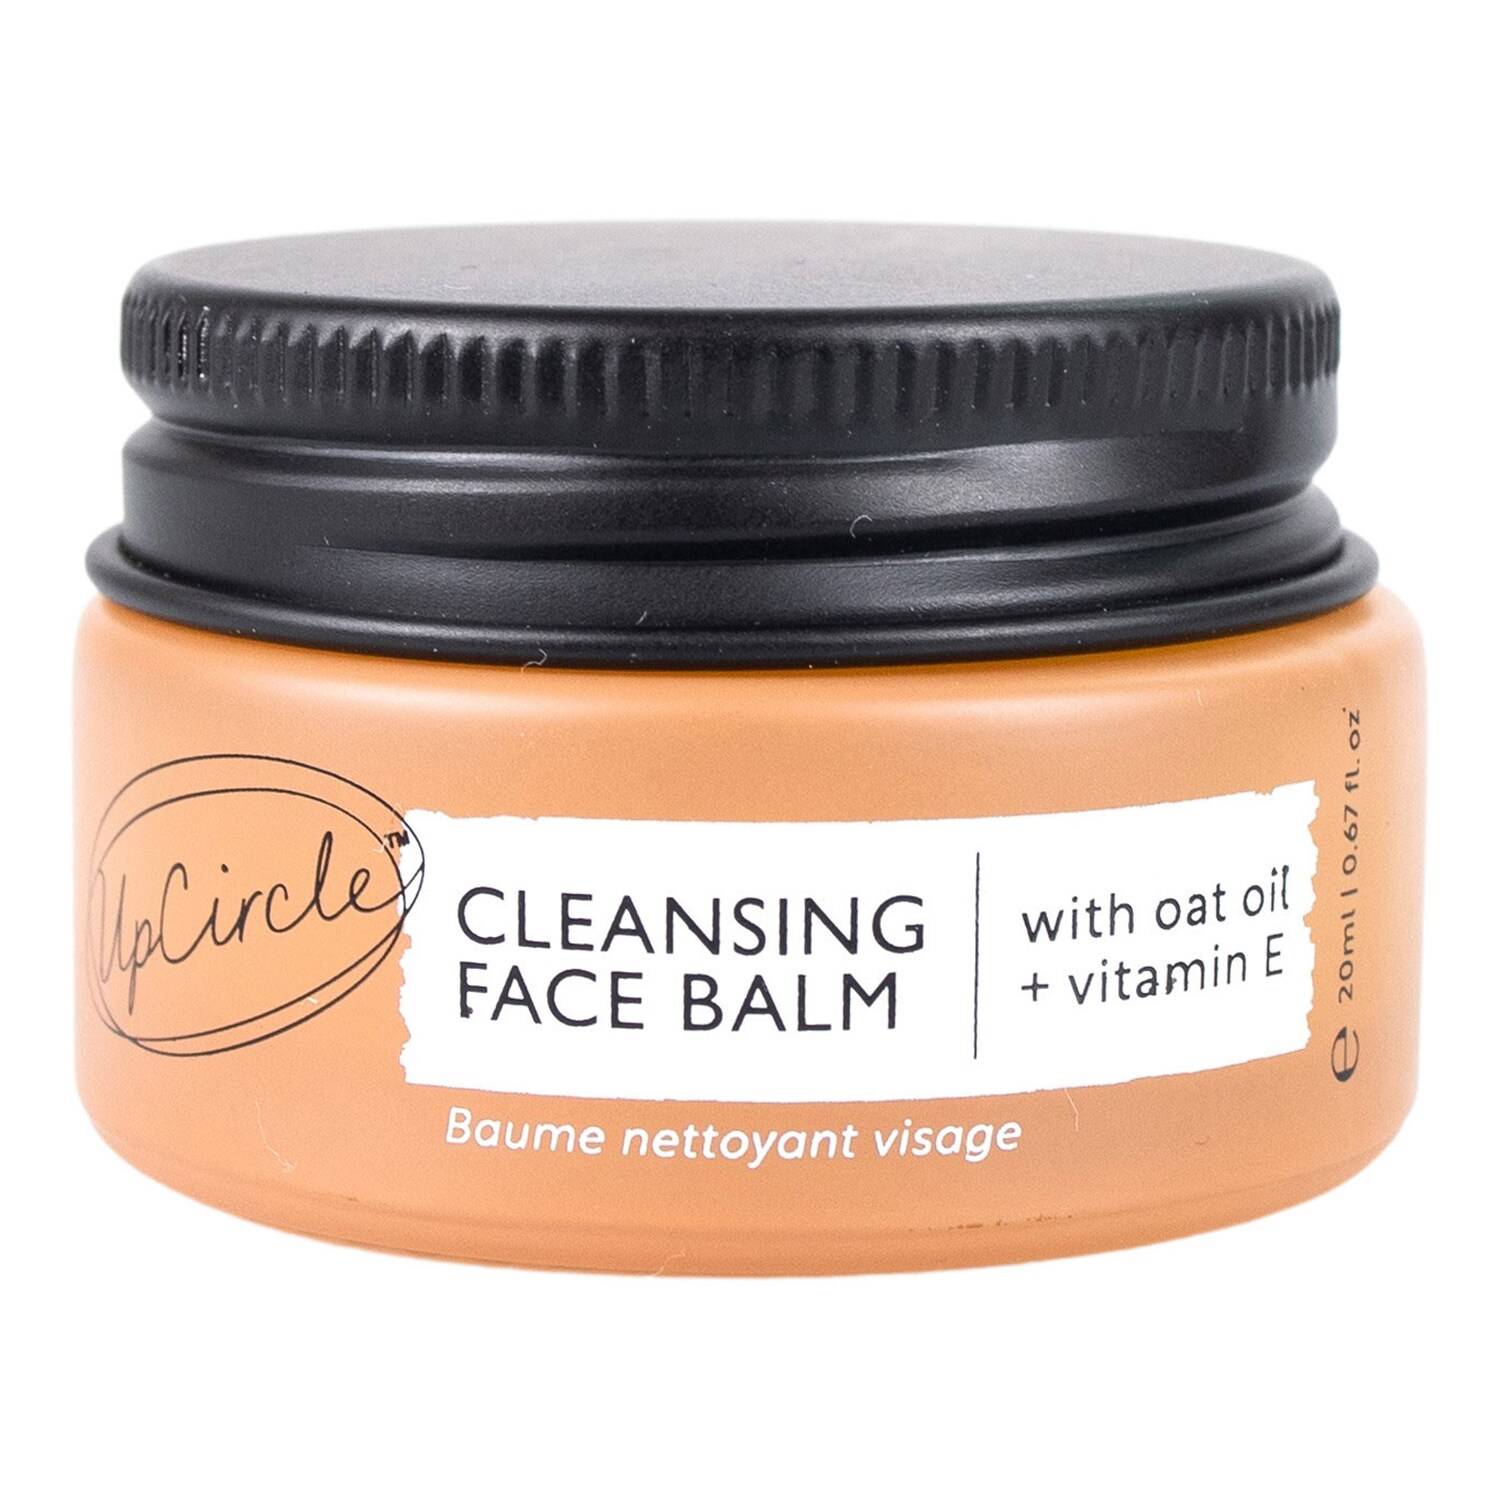 Upcircle Beauty Cleansing Face Balm With Oat Oil + Vitamin E 20Ml